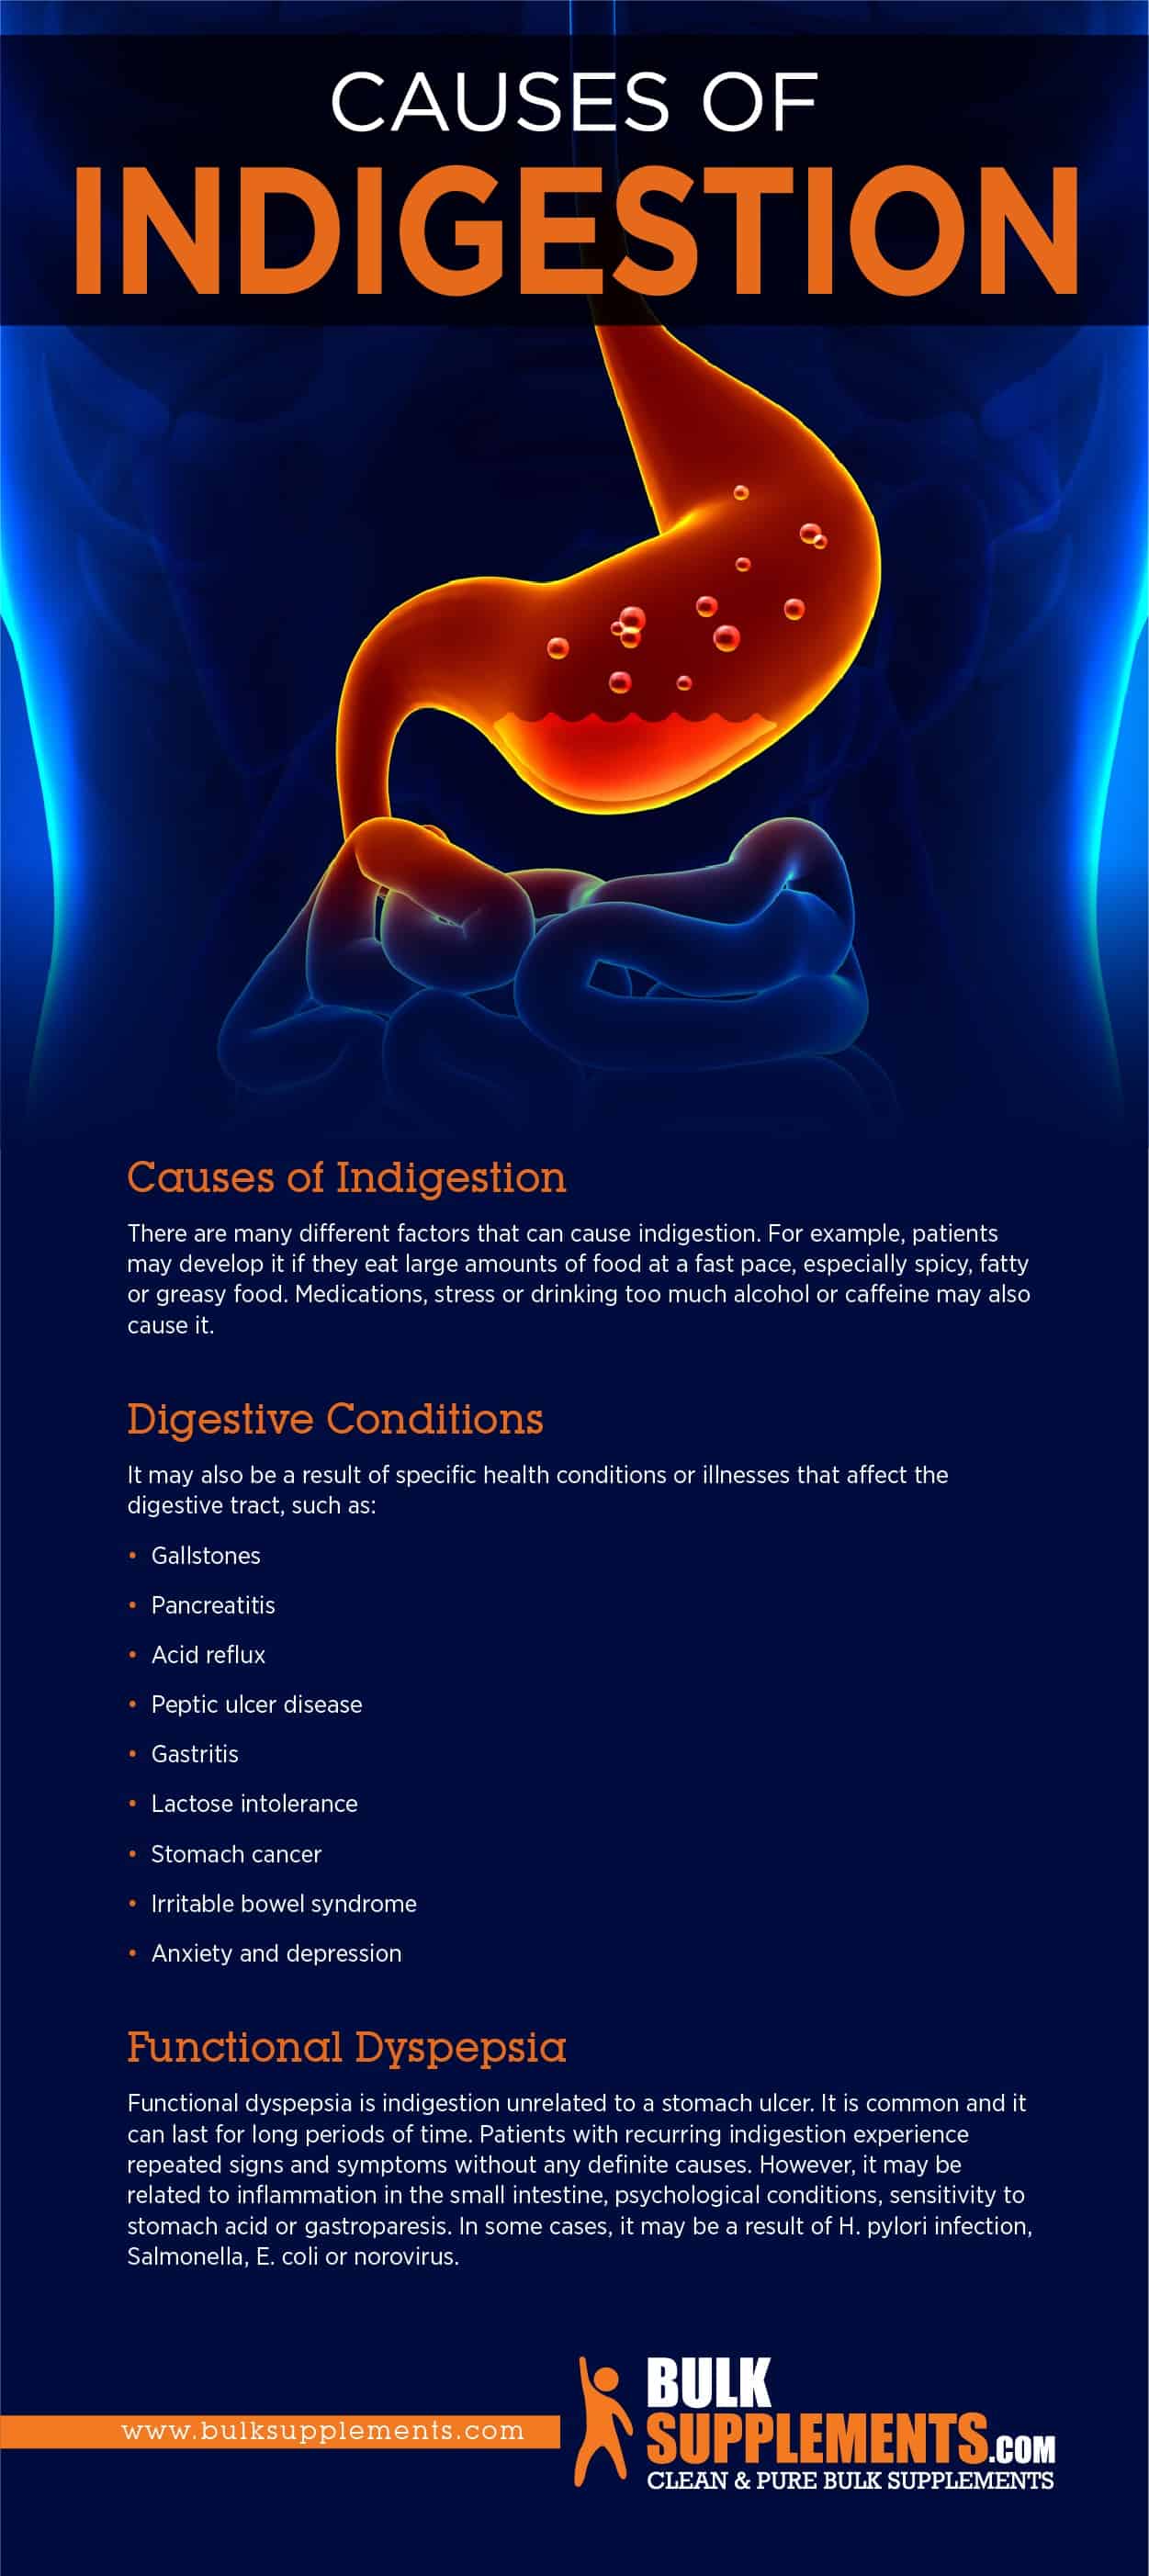 Causes of Indigestion